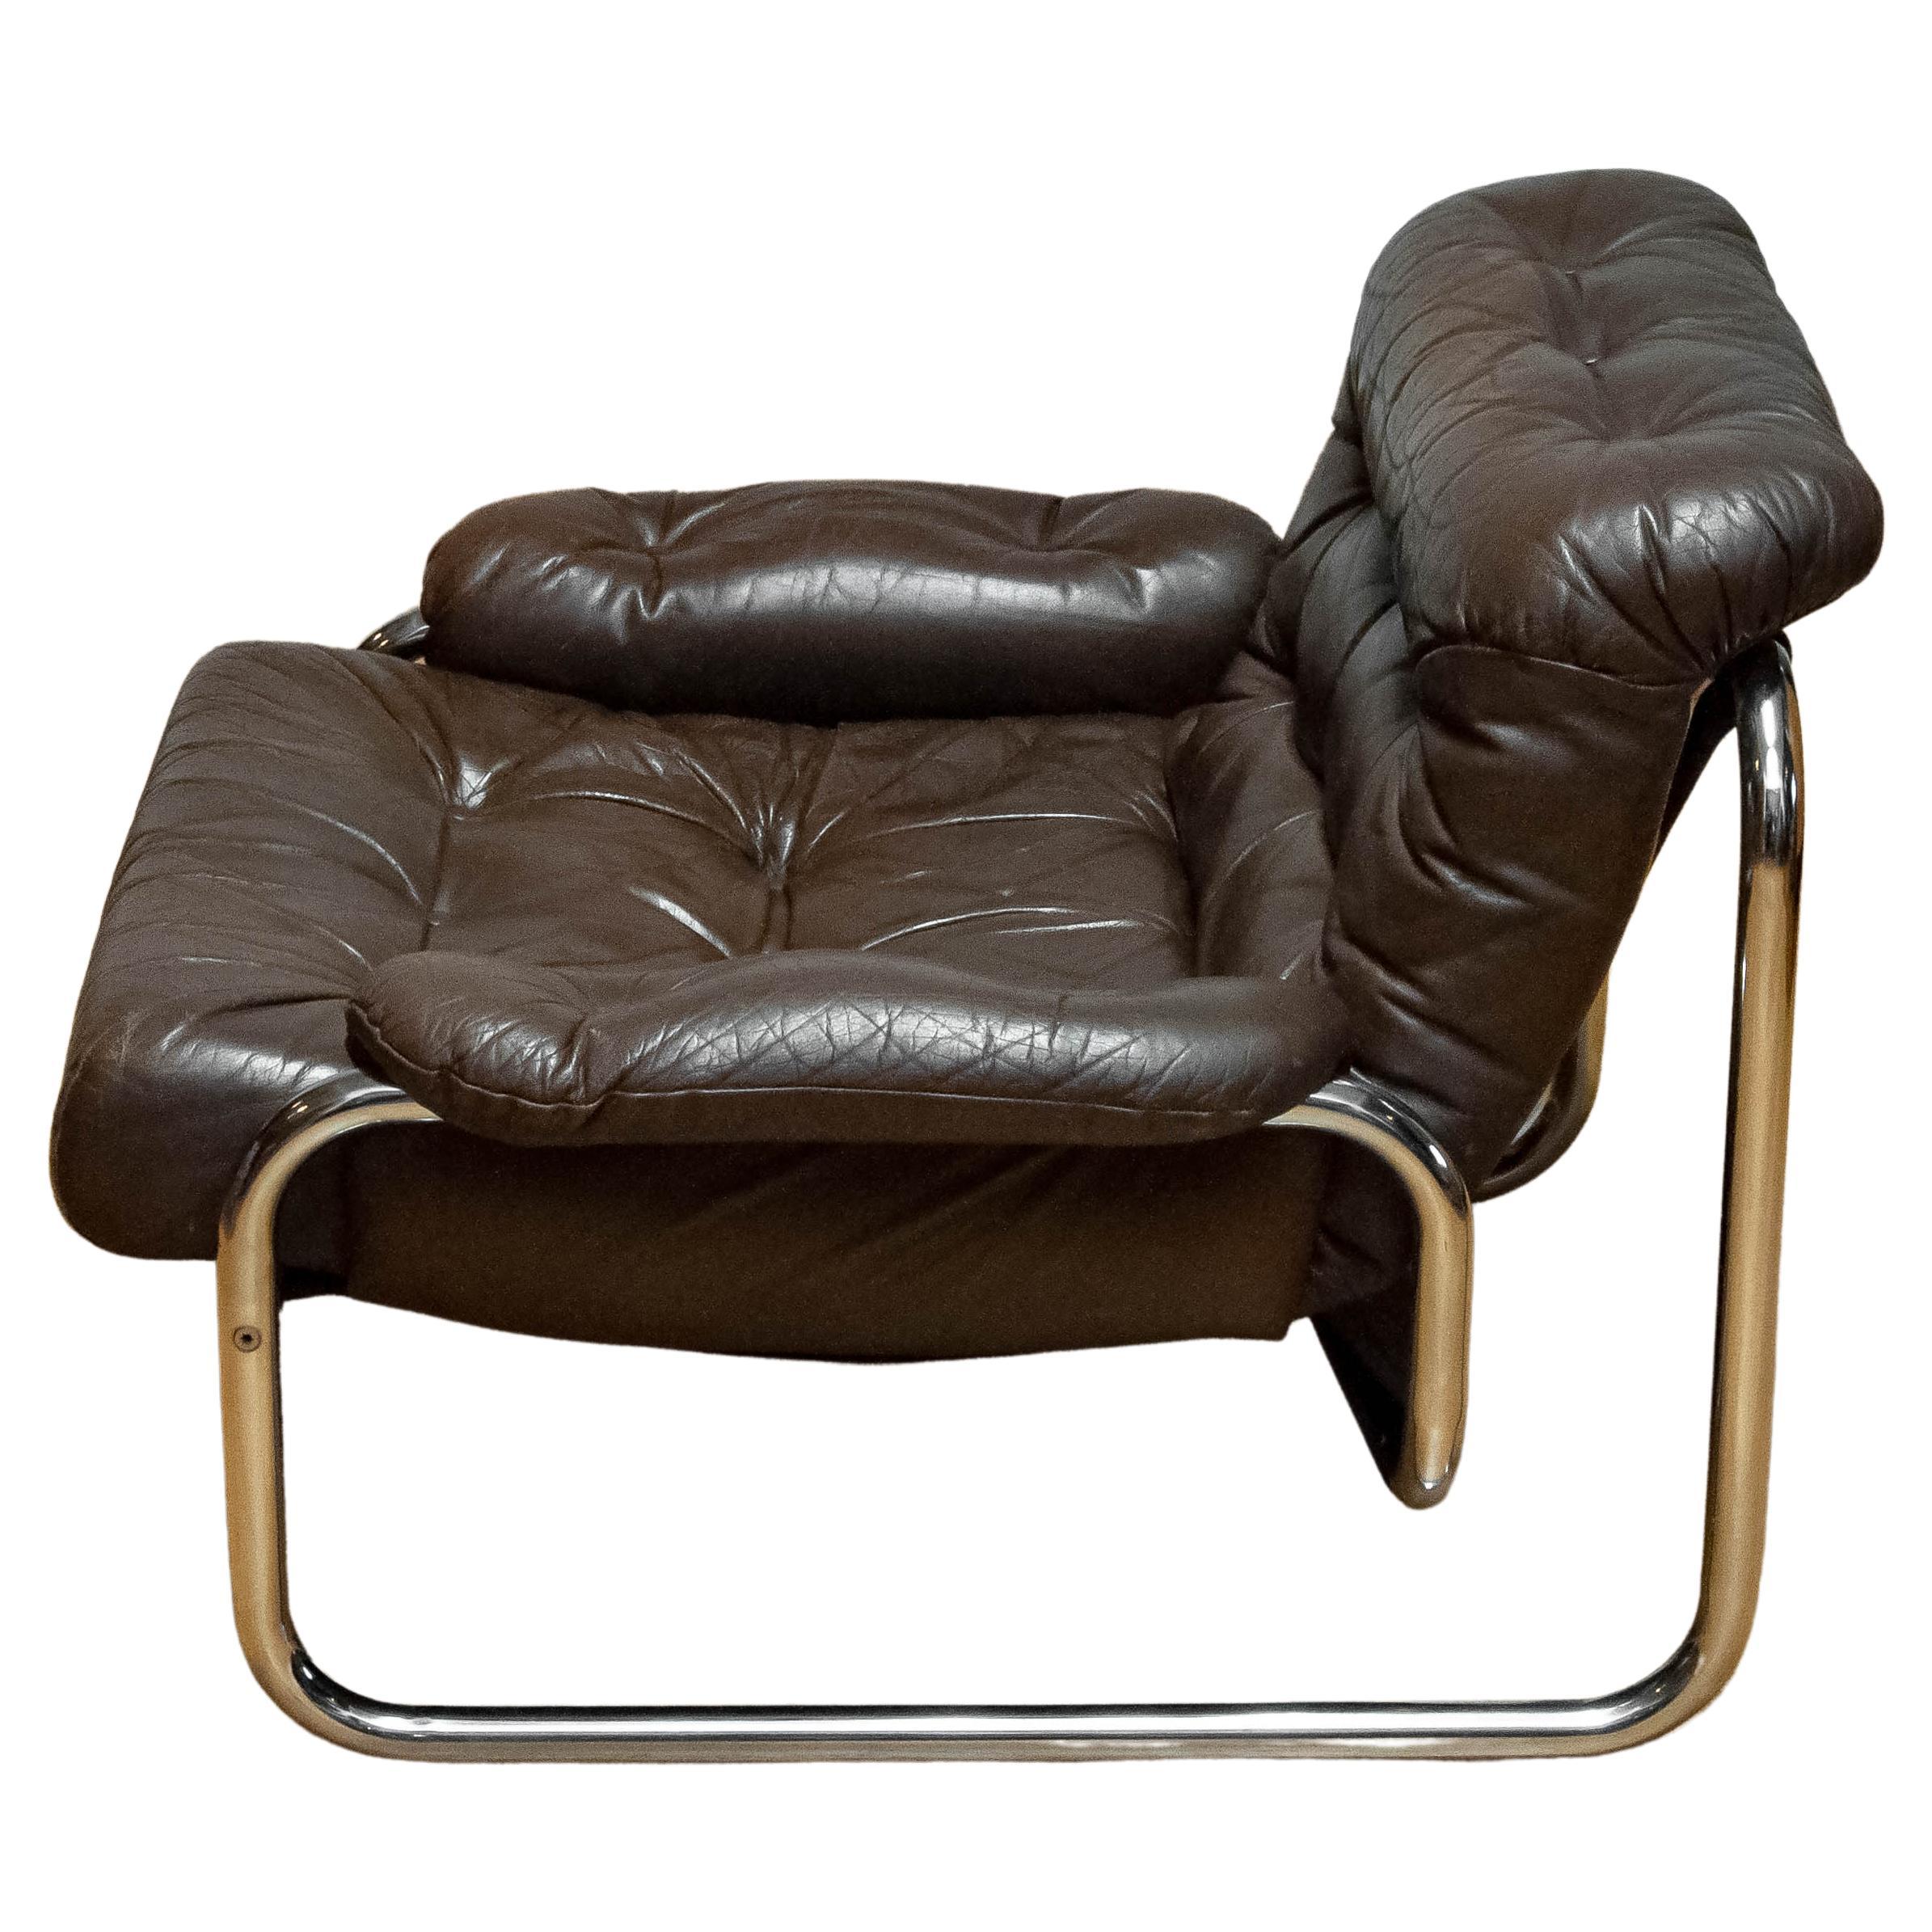 Beautiful lounge chair model 'Troligen' designed by Johan Bertil Häggström for Sved form Sweden
This chair is made of a tubular metal frame with brown leather cushion and armrests. The leather has a beautiful patina what gives the chair her